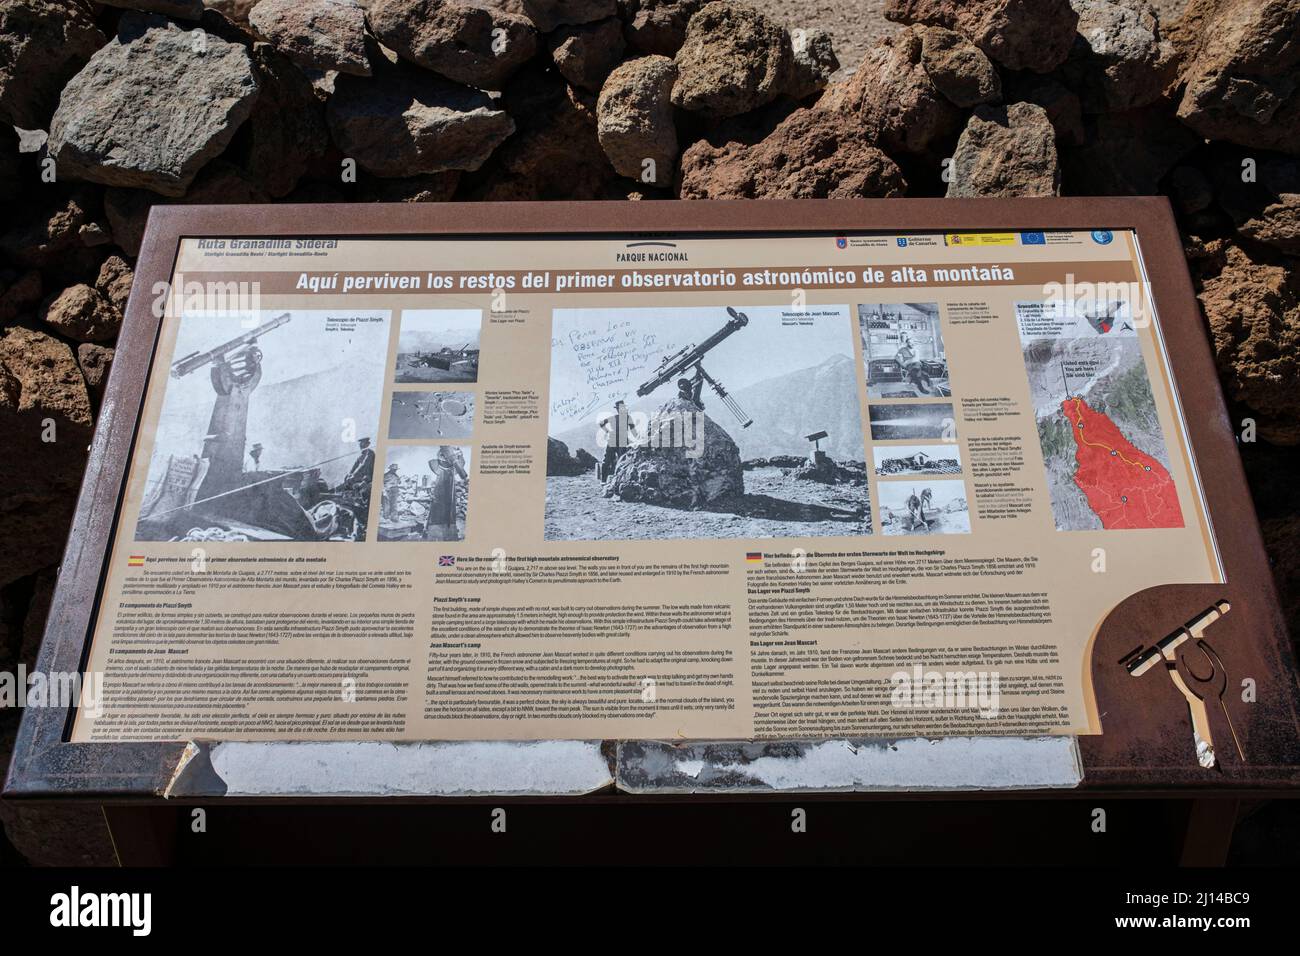 Information panel at the site of the first high mountain astronomical observatory on Guajara mountain in the Las Canadas del Teide national park, Tene Stock Photo